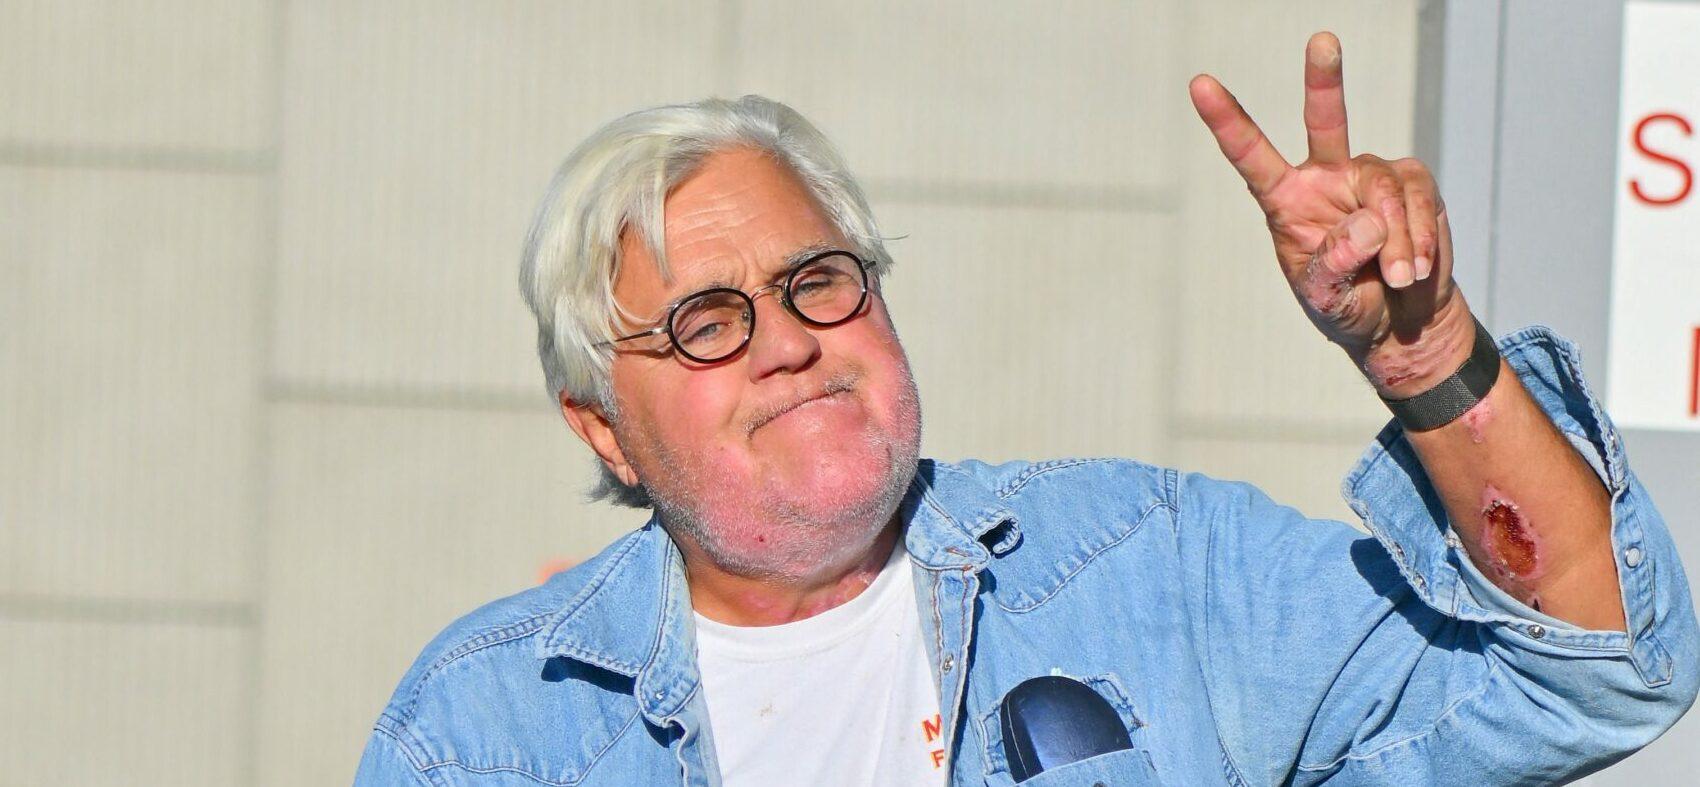 //Jay Leno relied on humor during recovery scaled e